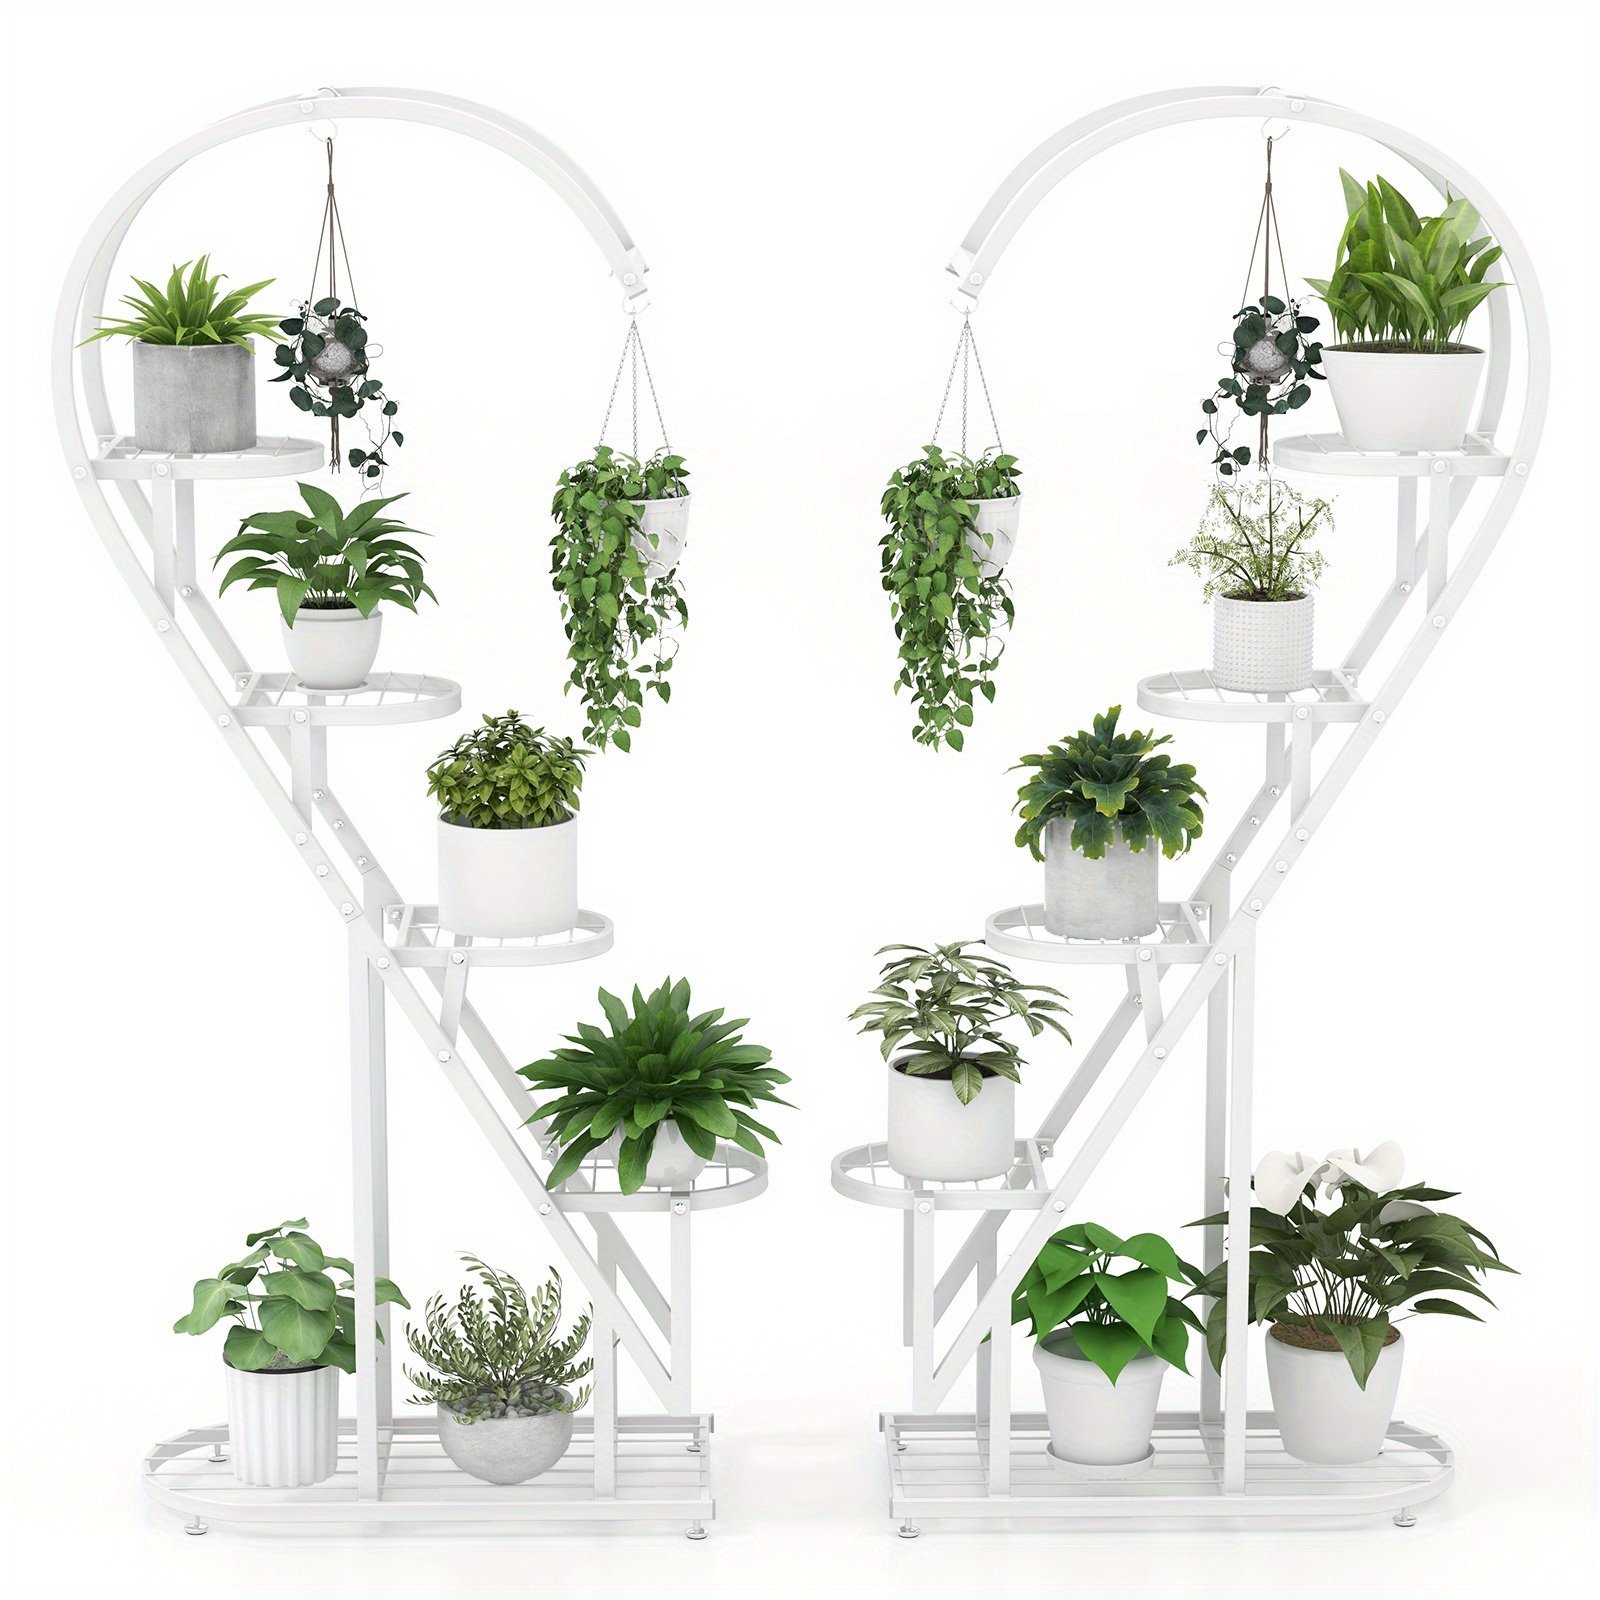 

Lifezeal 5 Tier Metal Plant Stand Heart-shaped Shelf W/hanging Hook For Multiple Plants